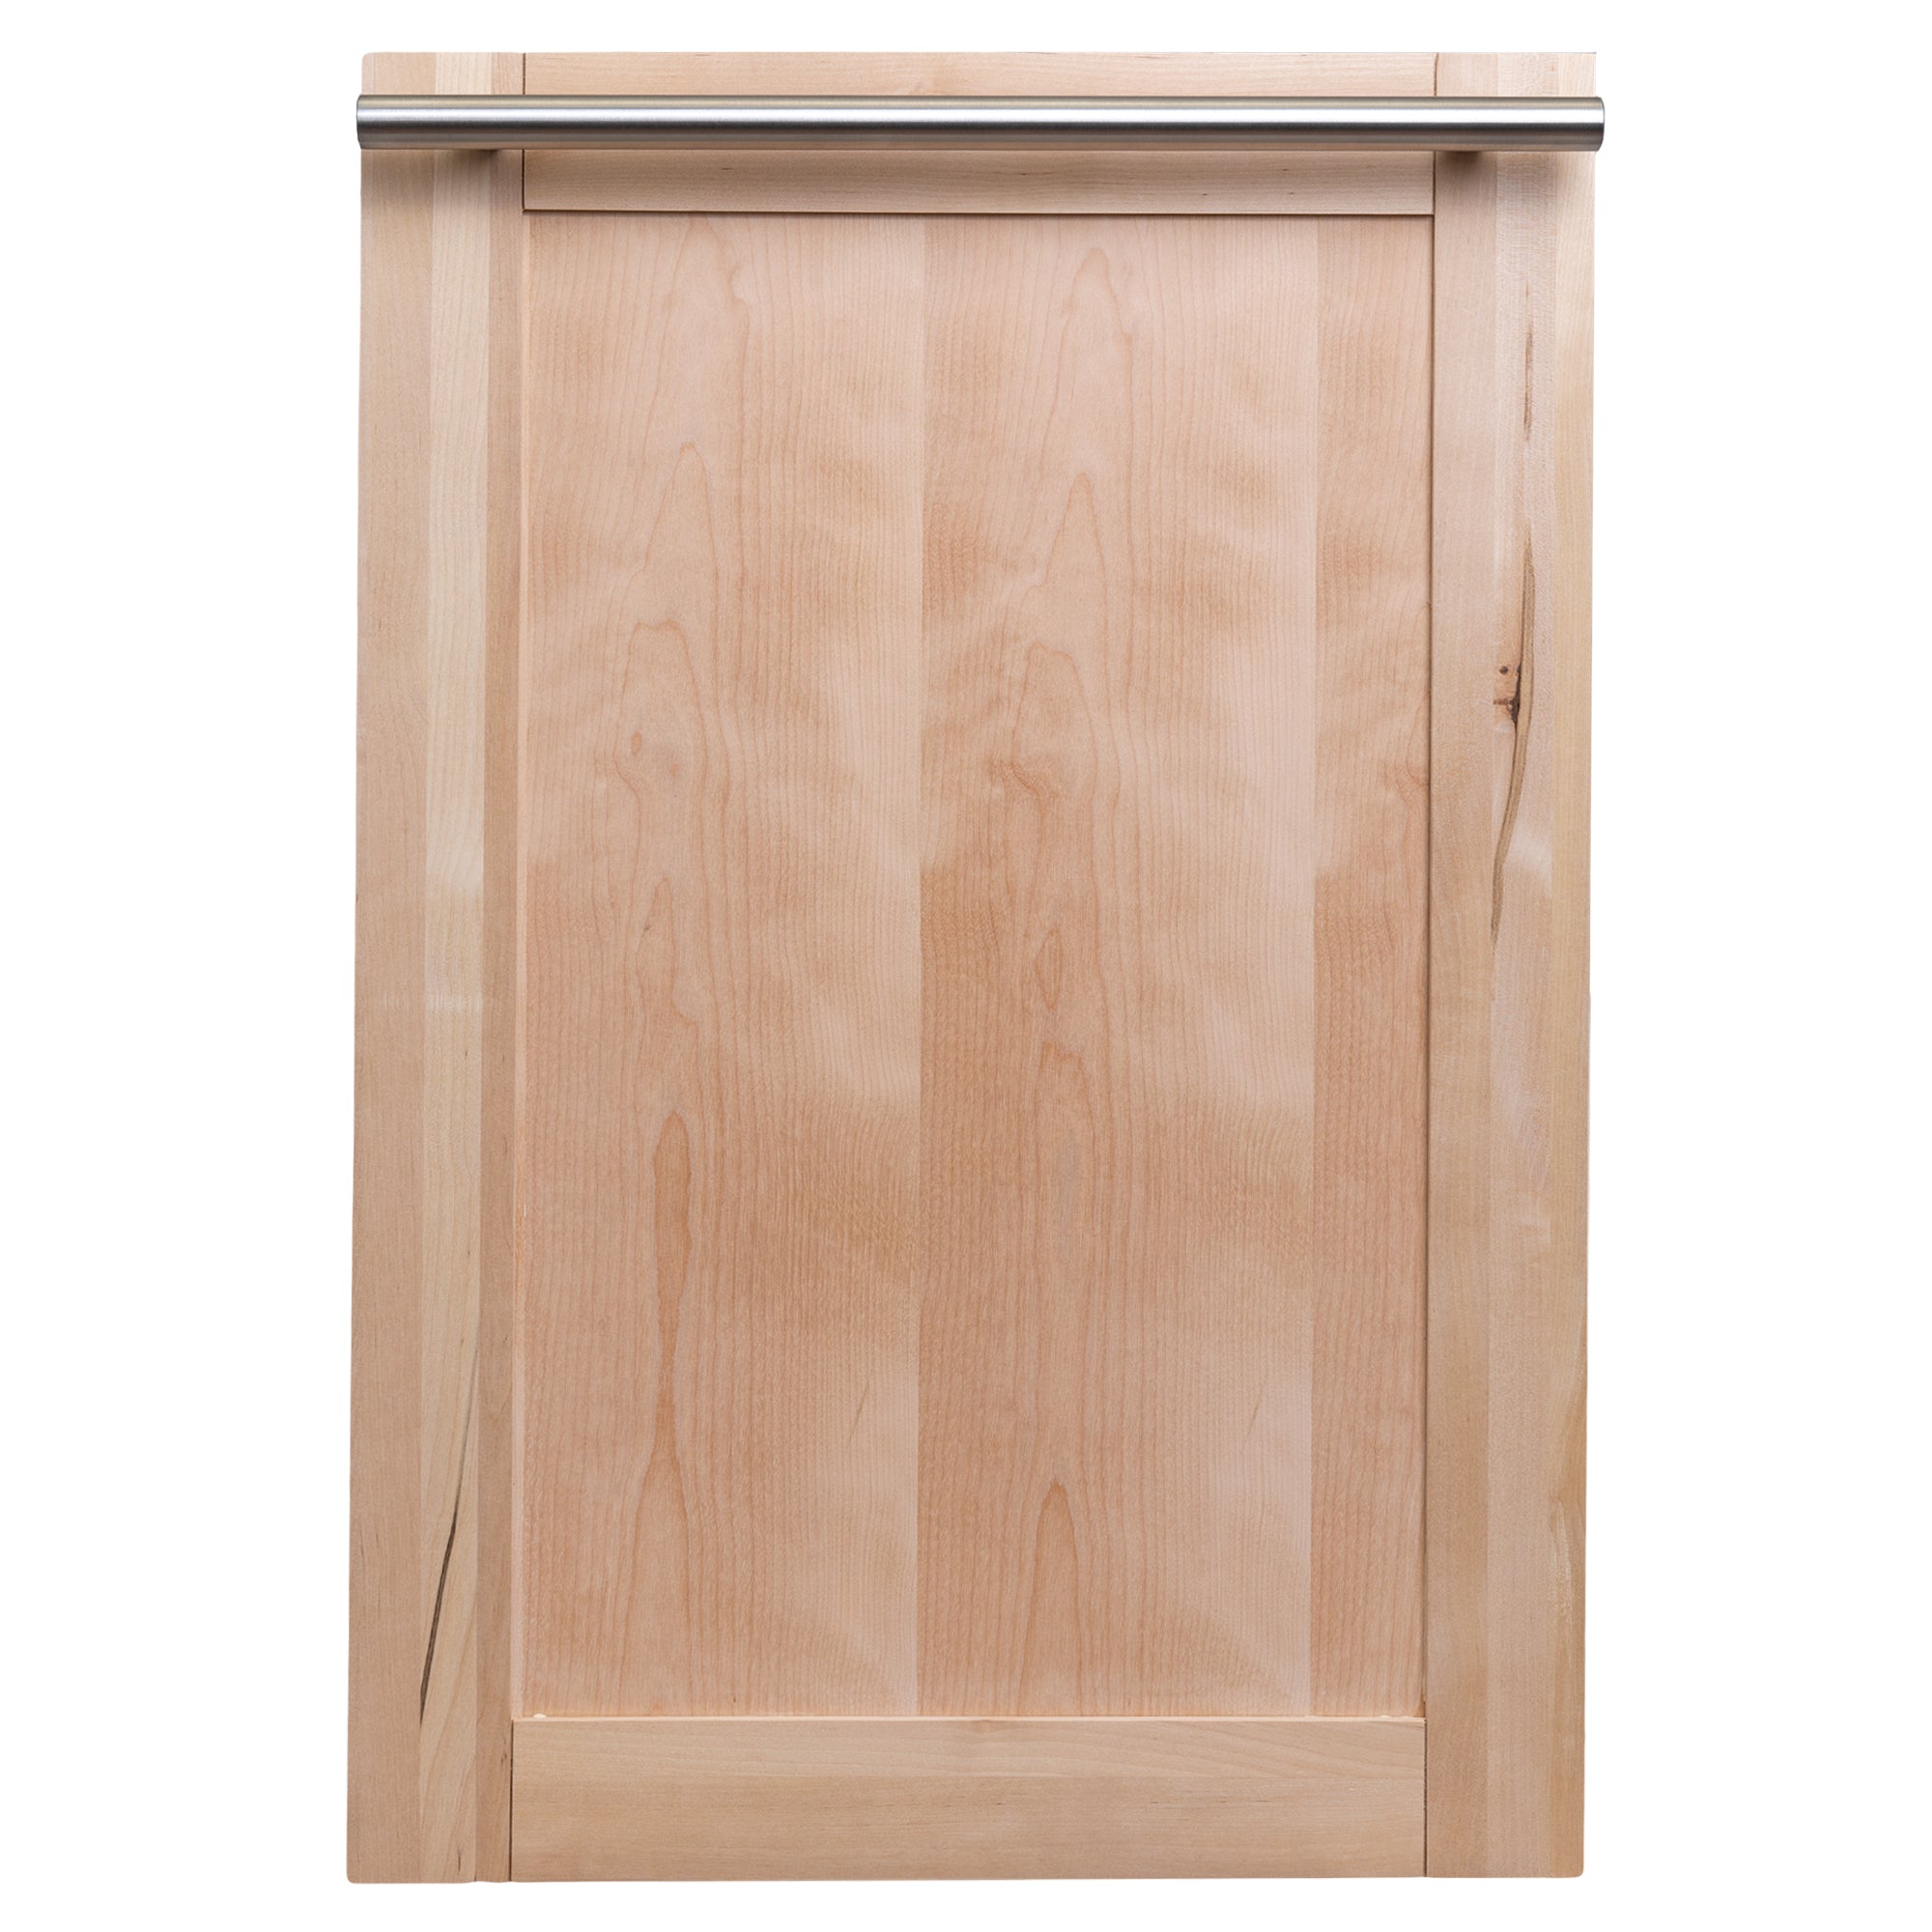 ZLINE 18" Dishwasher Panel in Unfinished Wood with Modern Handle (DP-UF-18)